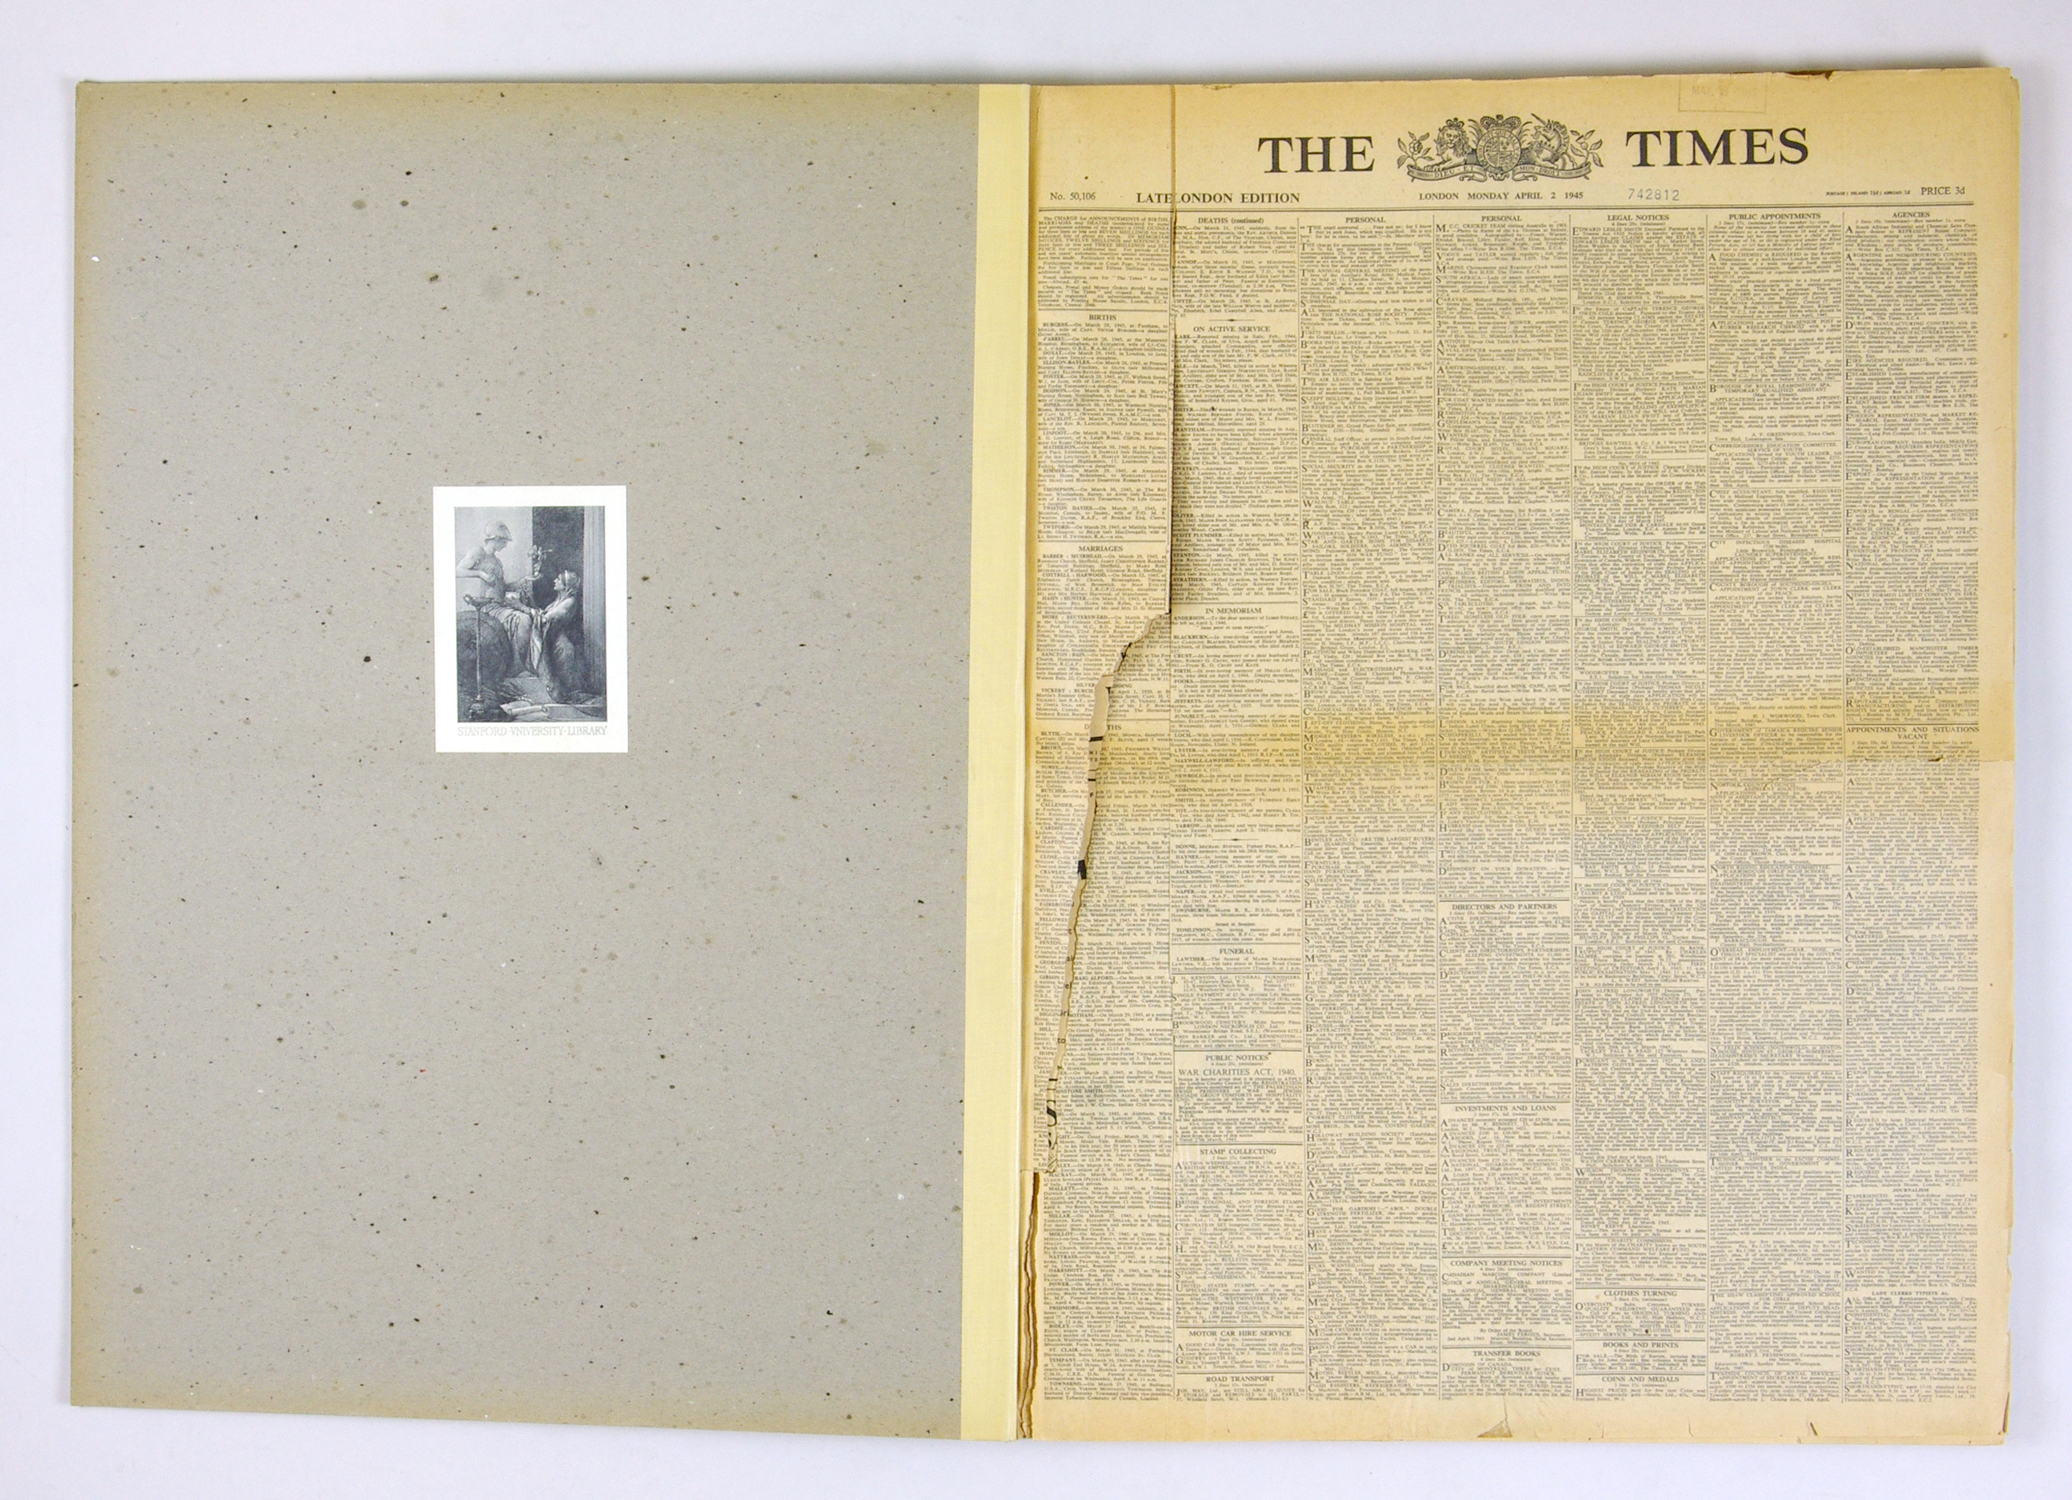 LONDON Times Historical News Paper 1945 April July August The End of WW II Bound Book Set of 3